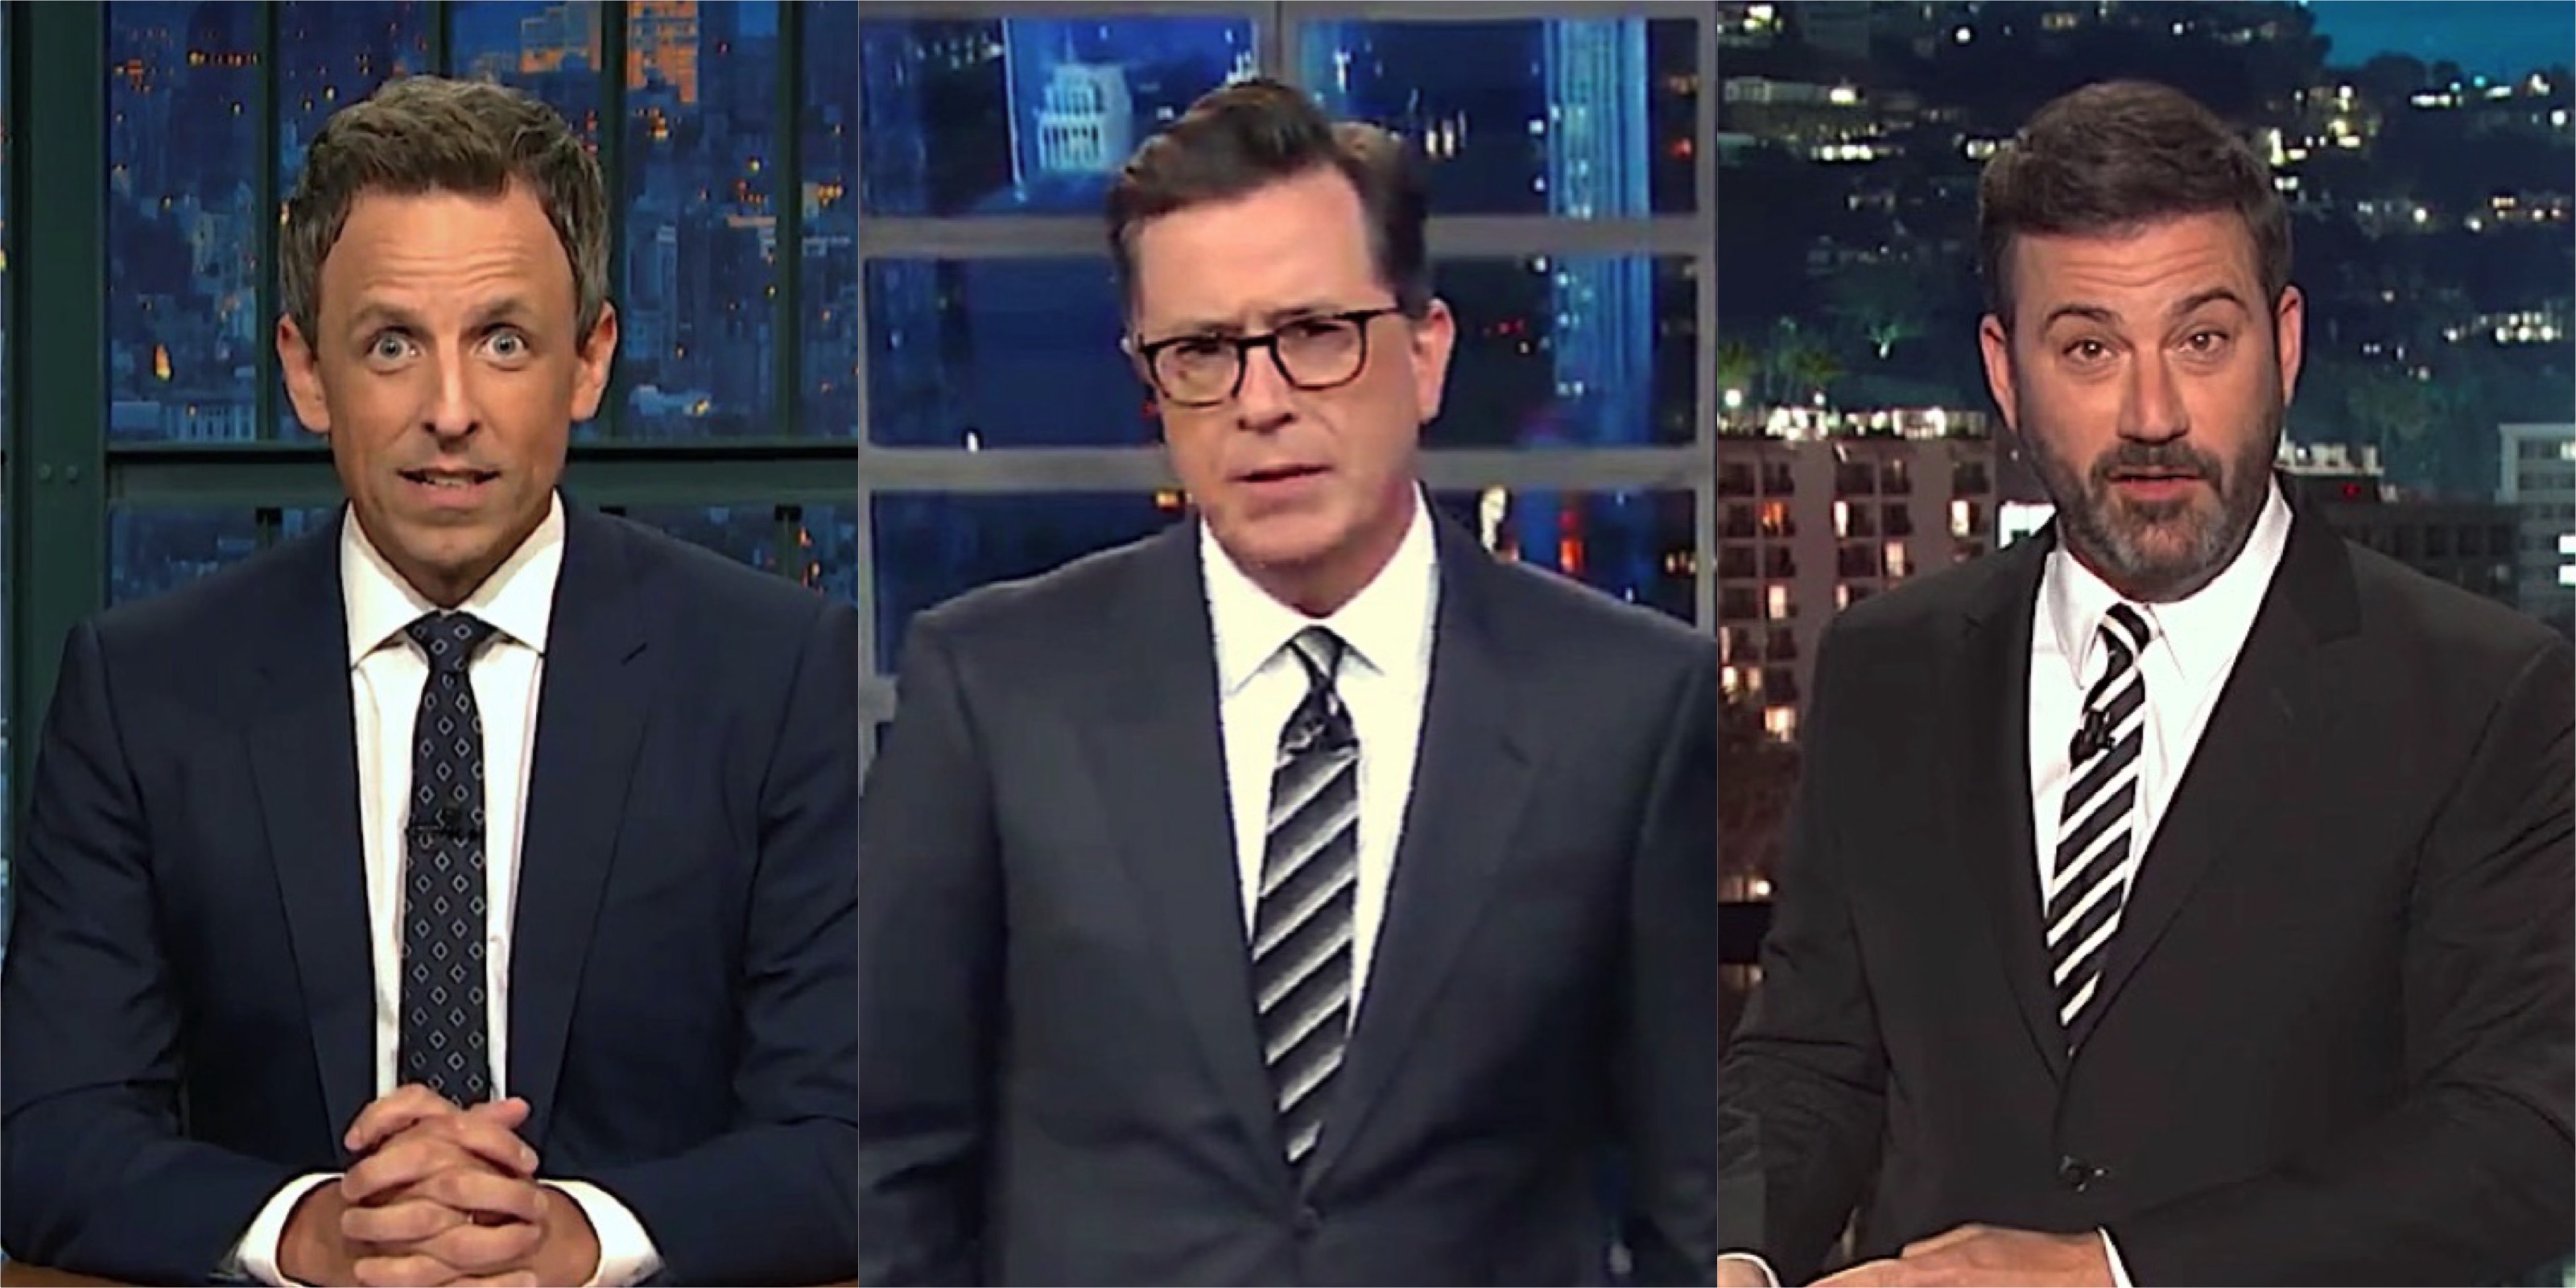 Late-night America is worried about Trump